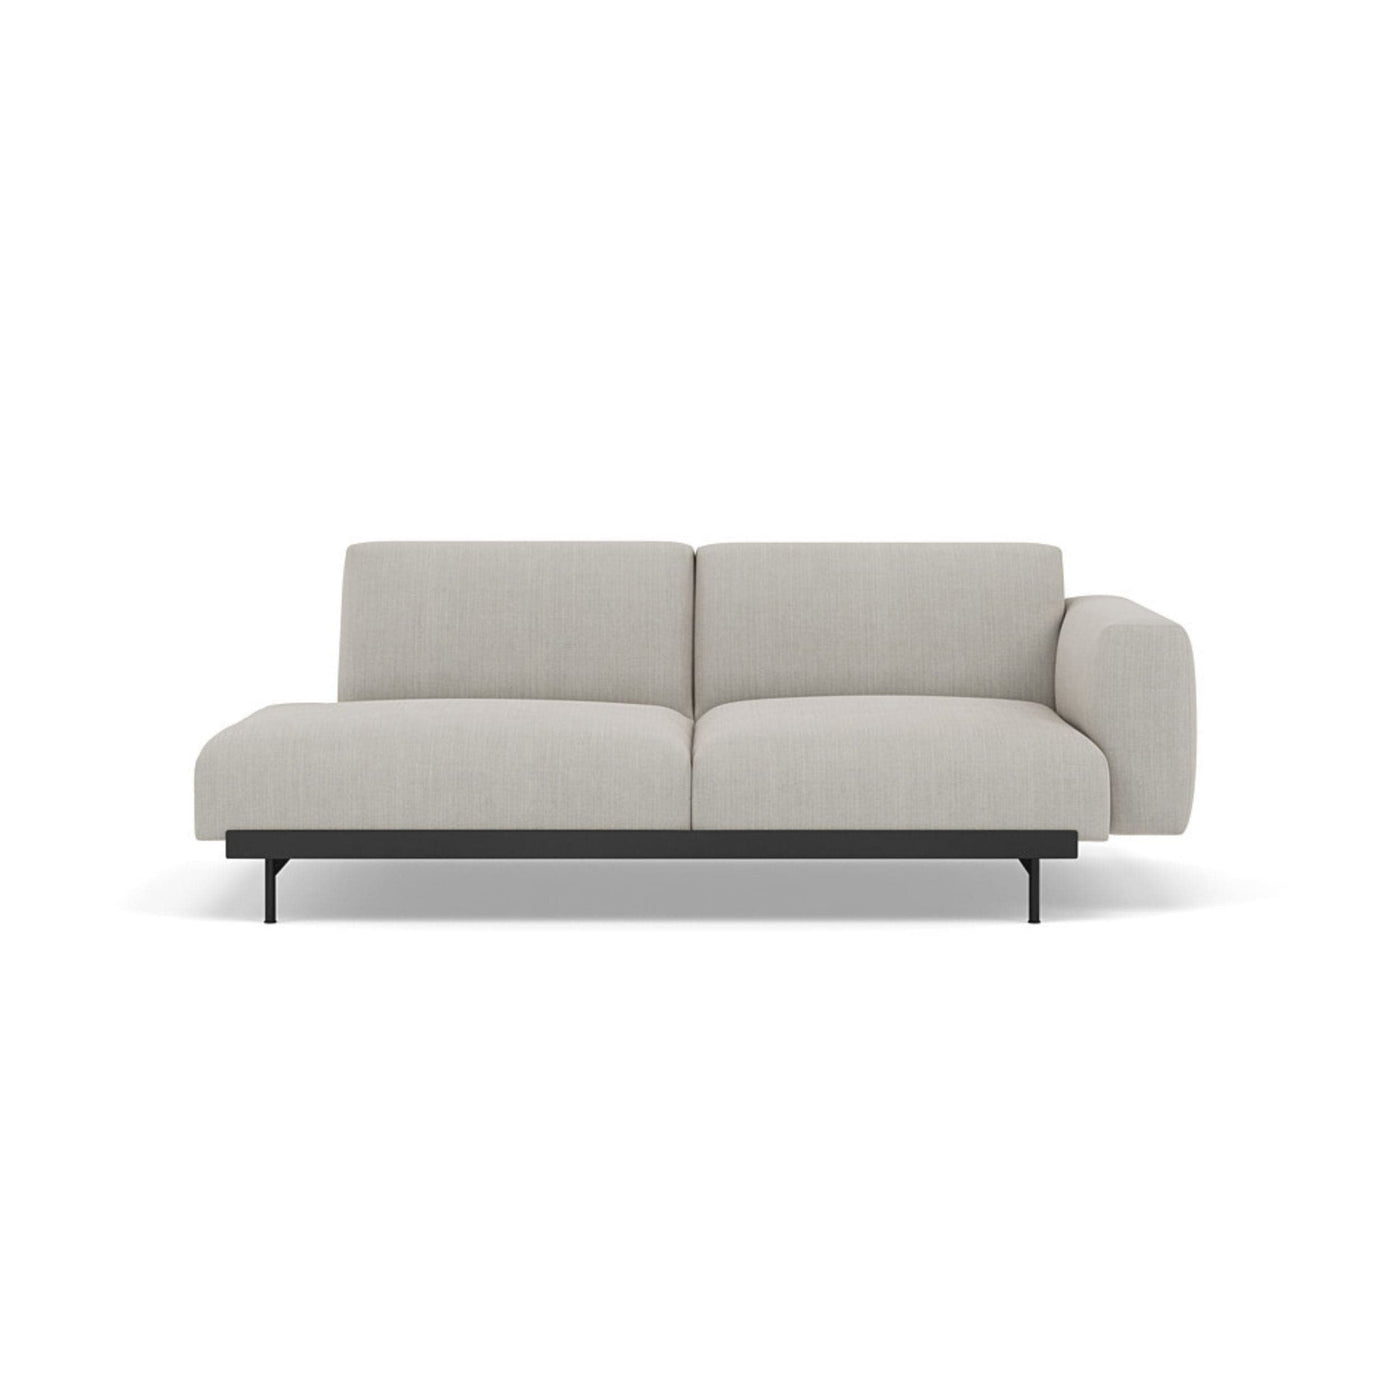 Muuto In Situ Modular 2 Seater Sofa, configuration 3. Made to order from someday designs #colour_fiord-201